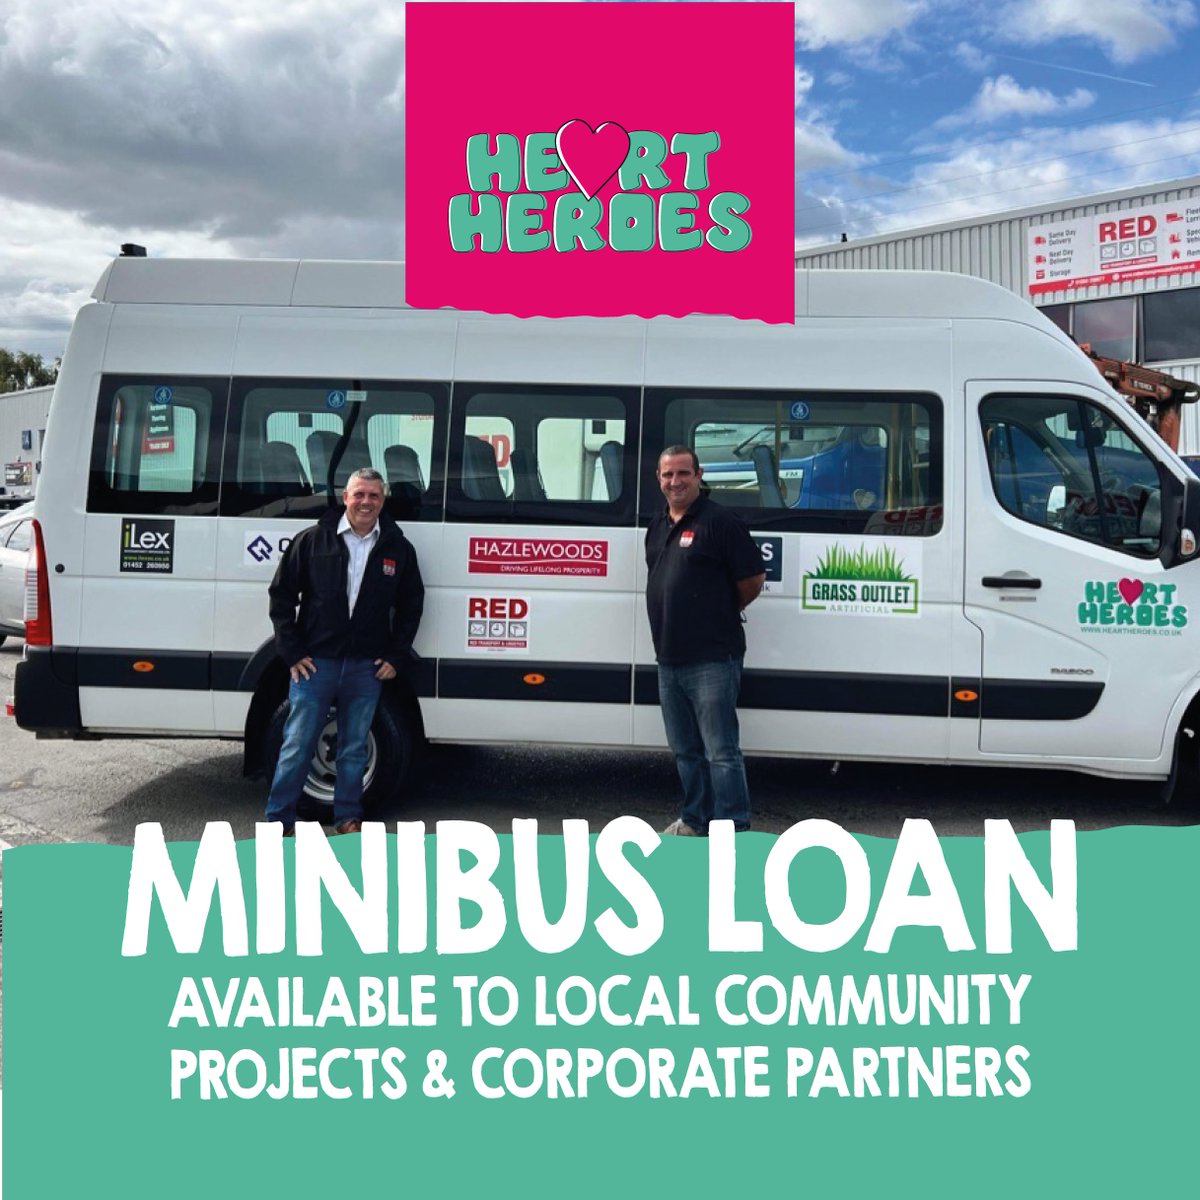 Our corporate sponsors can loan our minibus for any work-related events. We also support community projects such as local sports clubs by transporting the teams to away games for a donation. @Elmrep @Hazlewoods @LonglevensRugby @Deacs3 @HotTubsRock @tgresidential